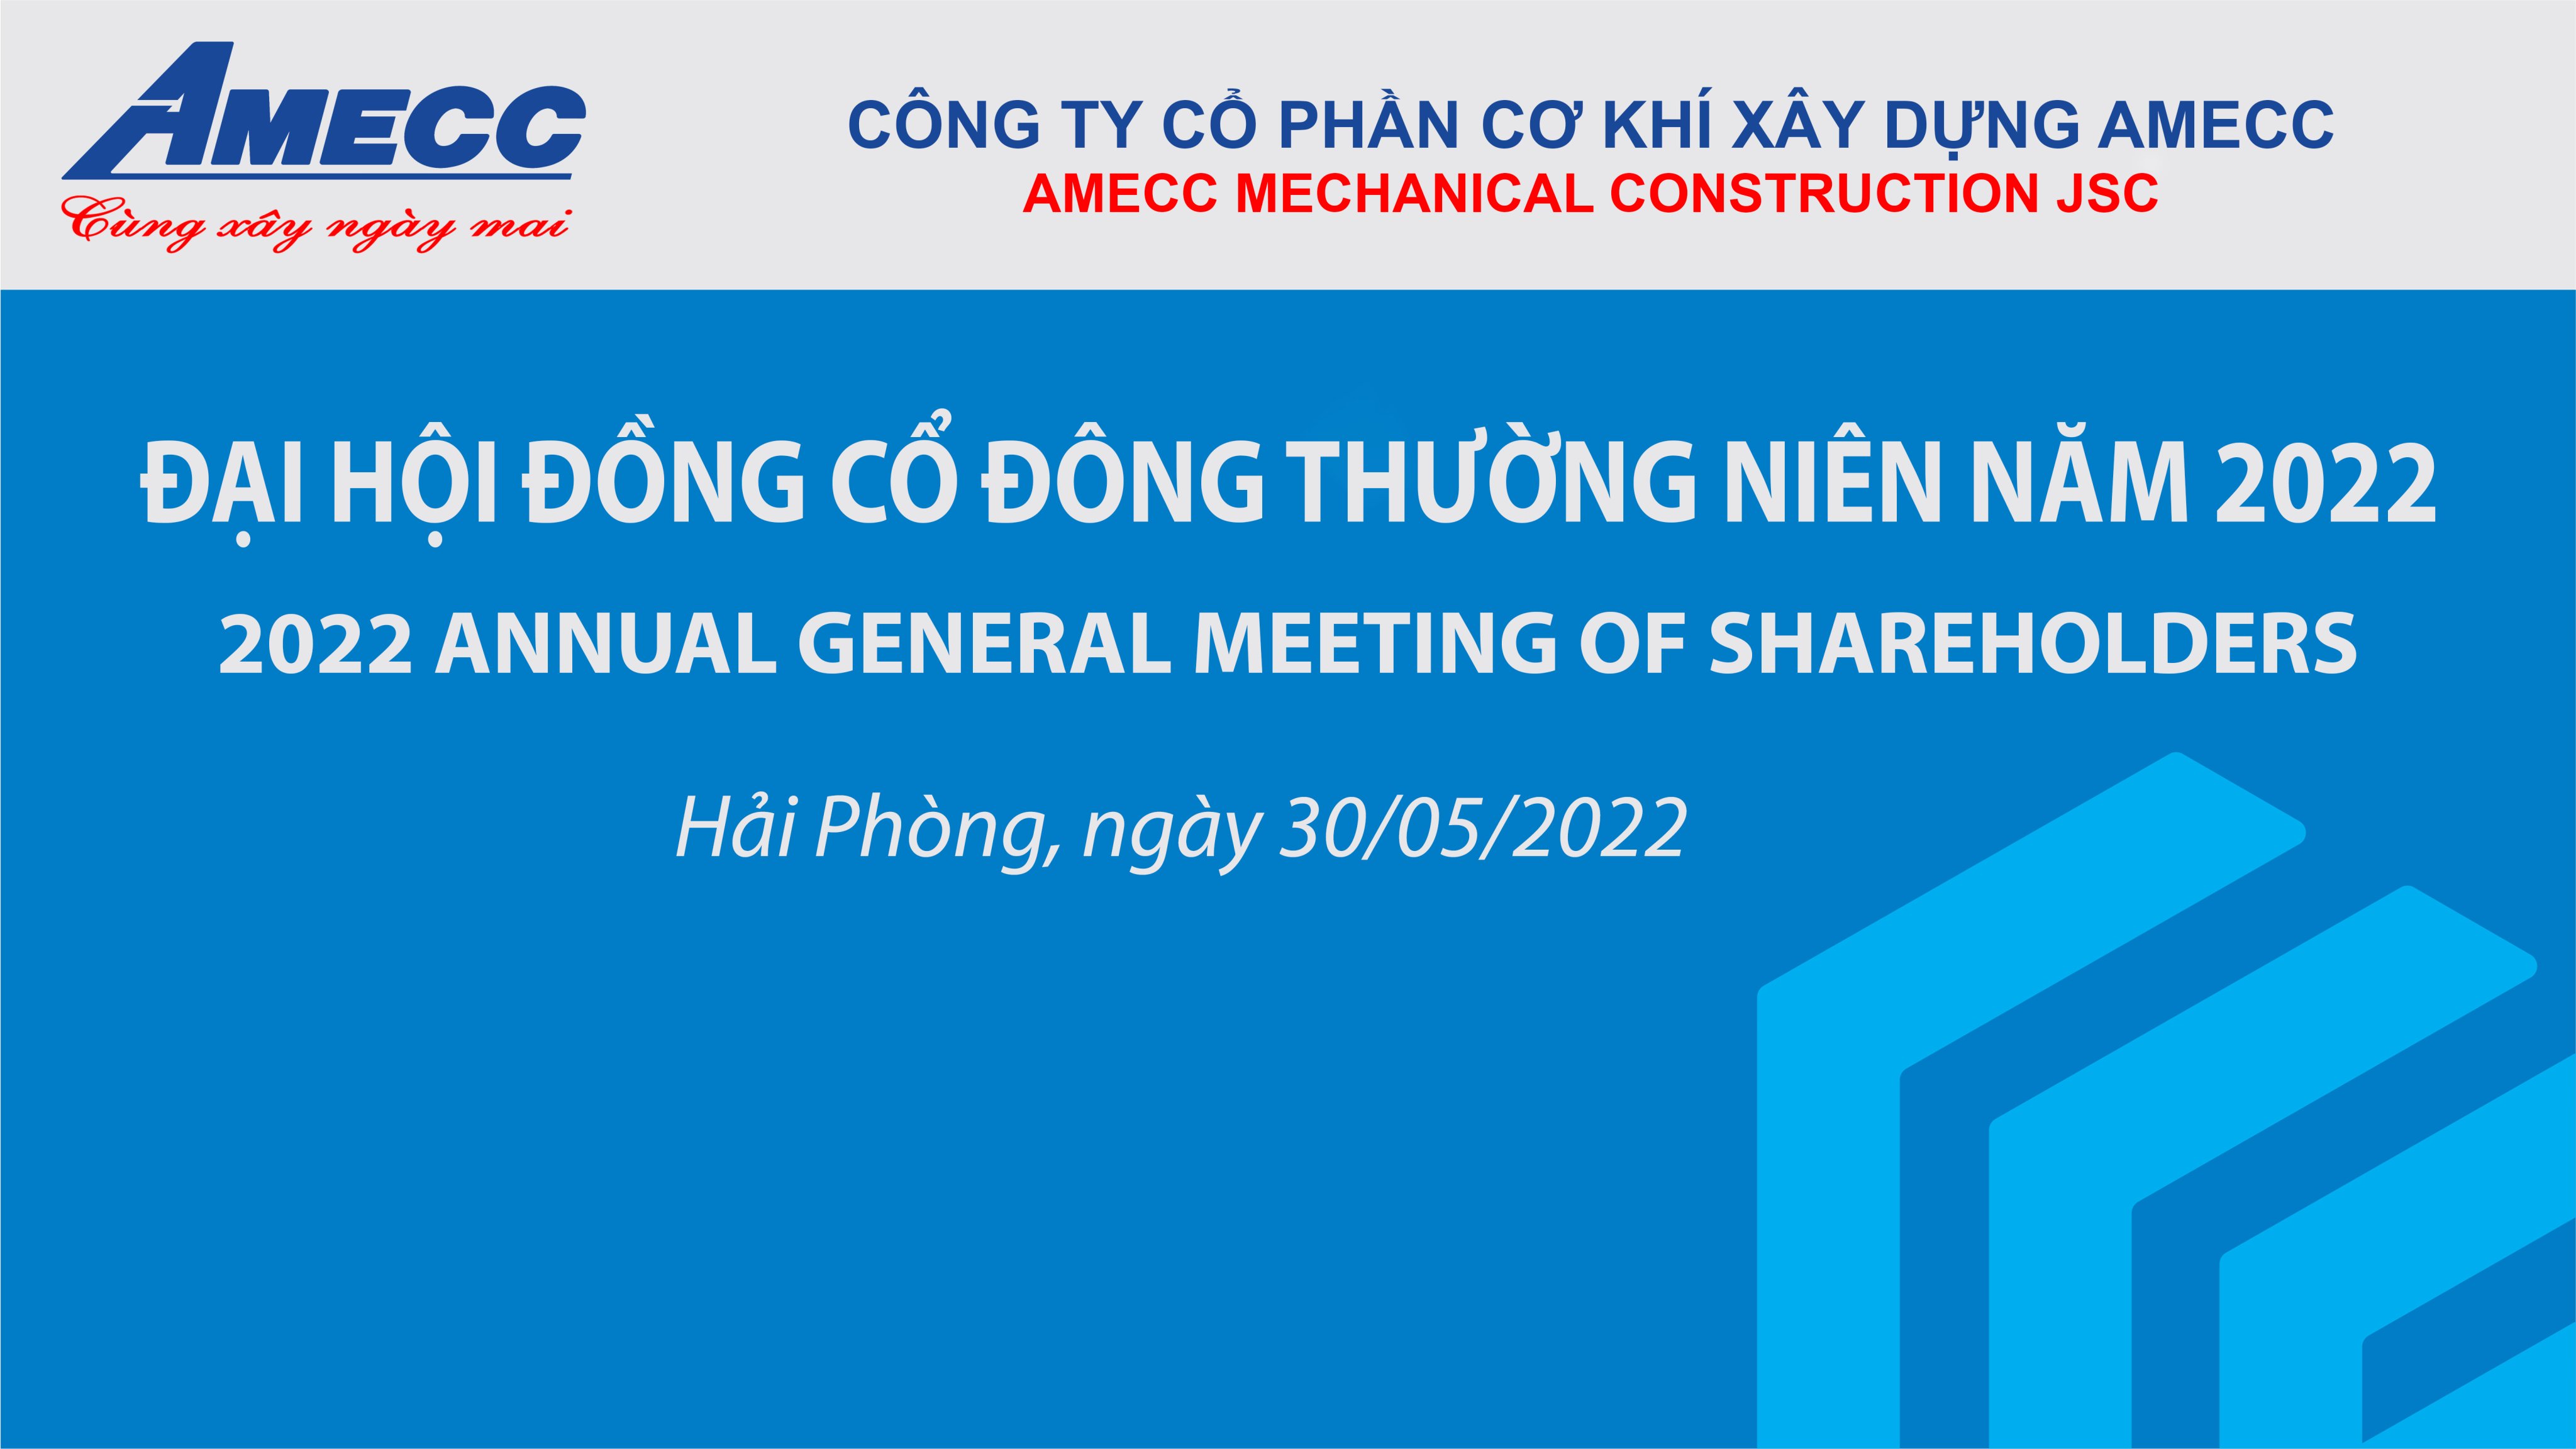 AMECC - SUCCESSFULLY ORGANIZED THE ANNUAL MEETING OF SHAREHOLDERS IN 2022 IN ONLINE FORM